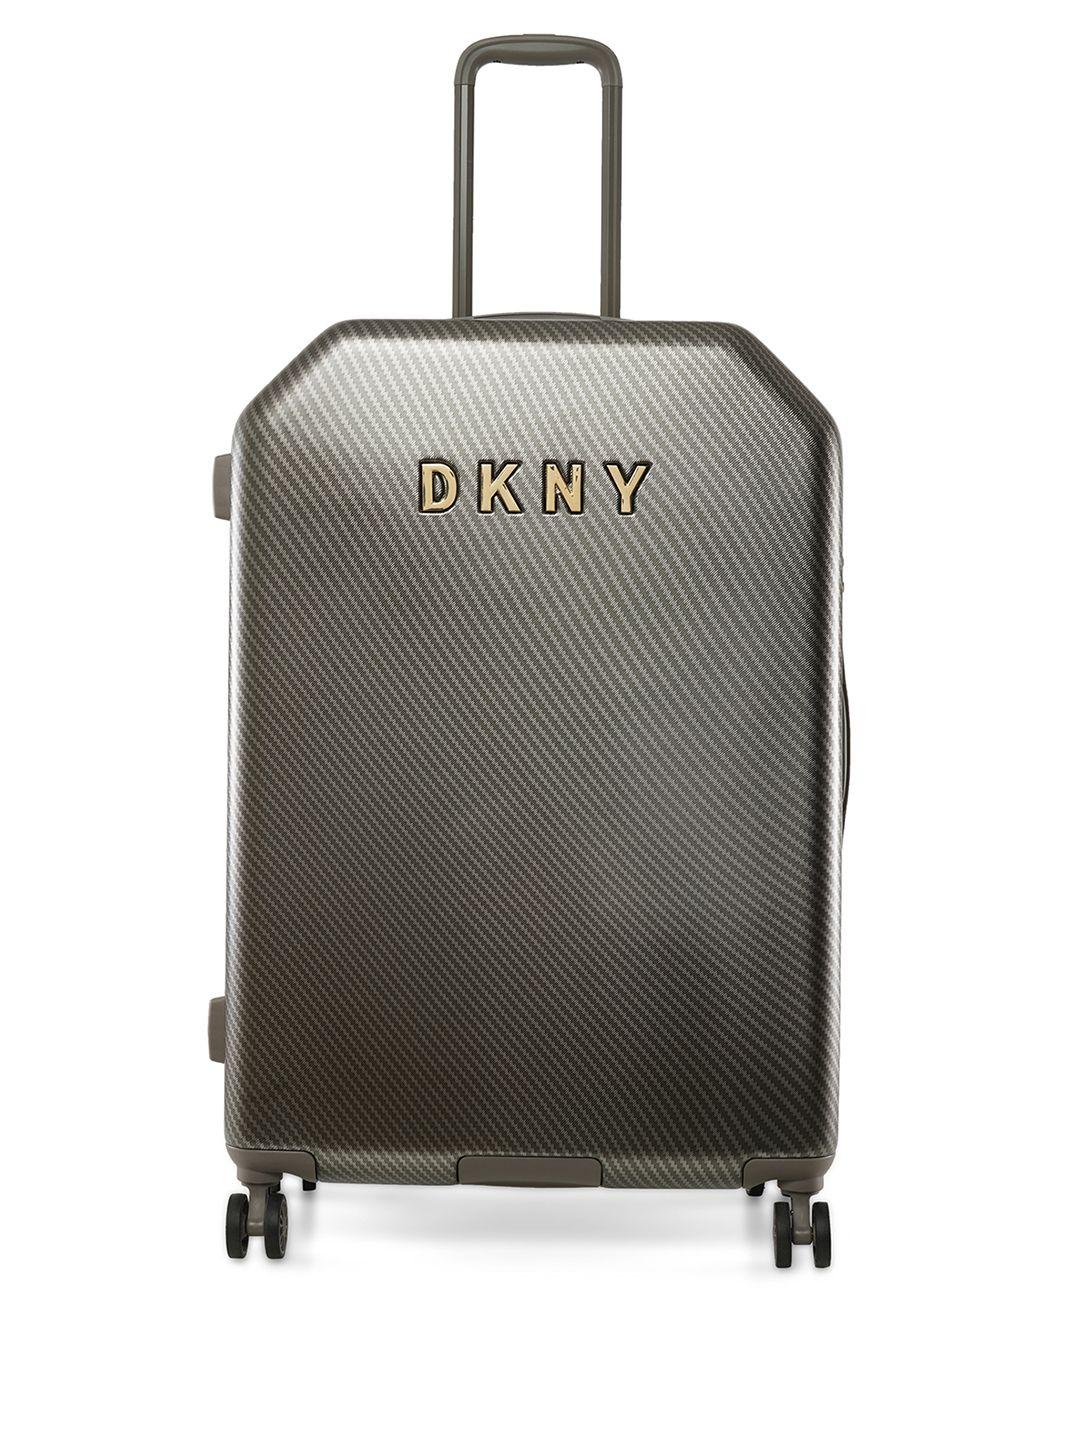 dkny allure 2.0 ash metallic color abs material hard 28" large size trolley